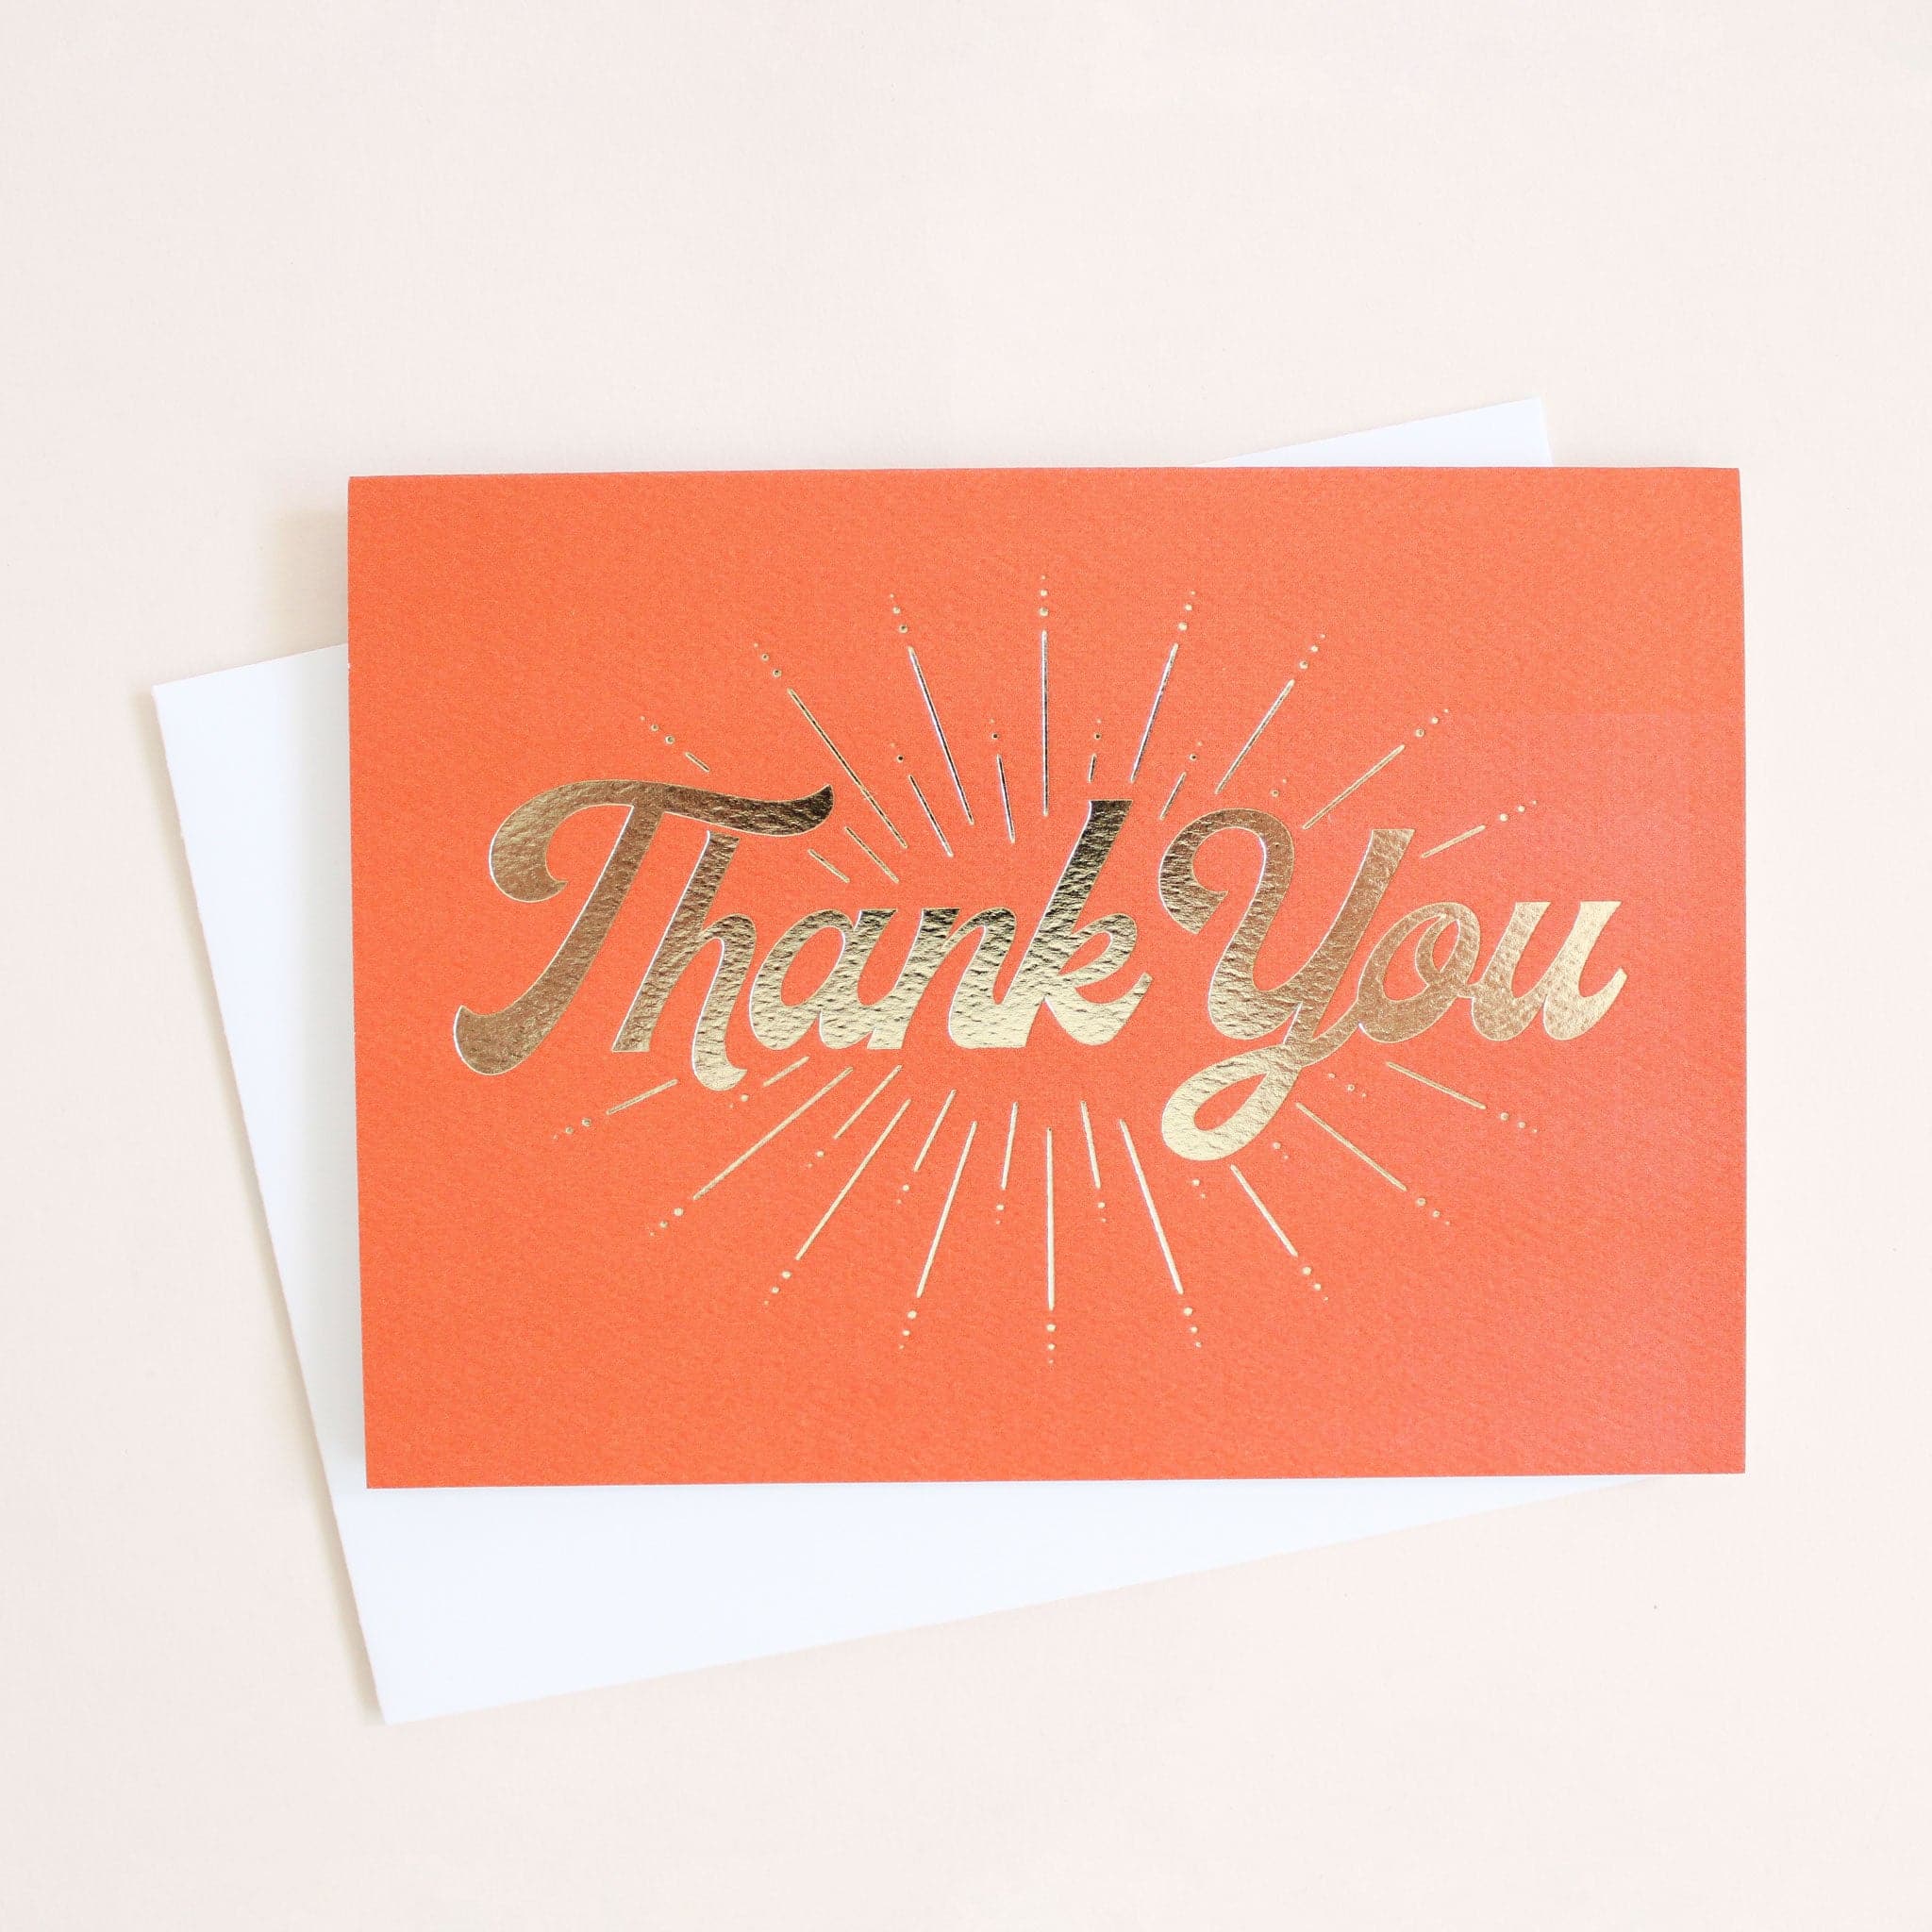 Tangerine orange card reading 'Thank You' in gold foil. Gold foil sunburst design beams from the text. The card is accompanied by a solid white envelope